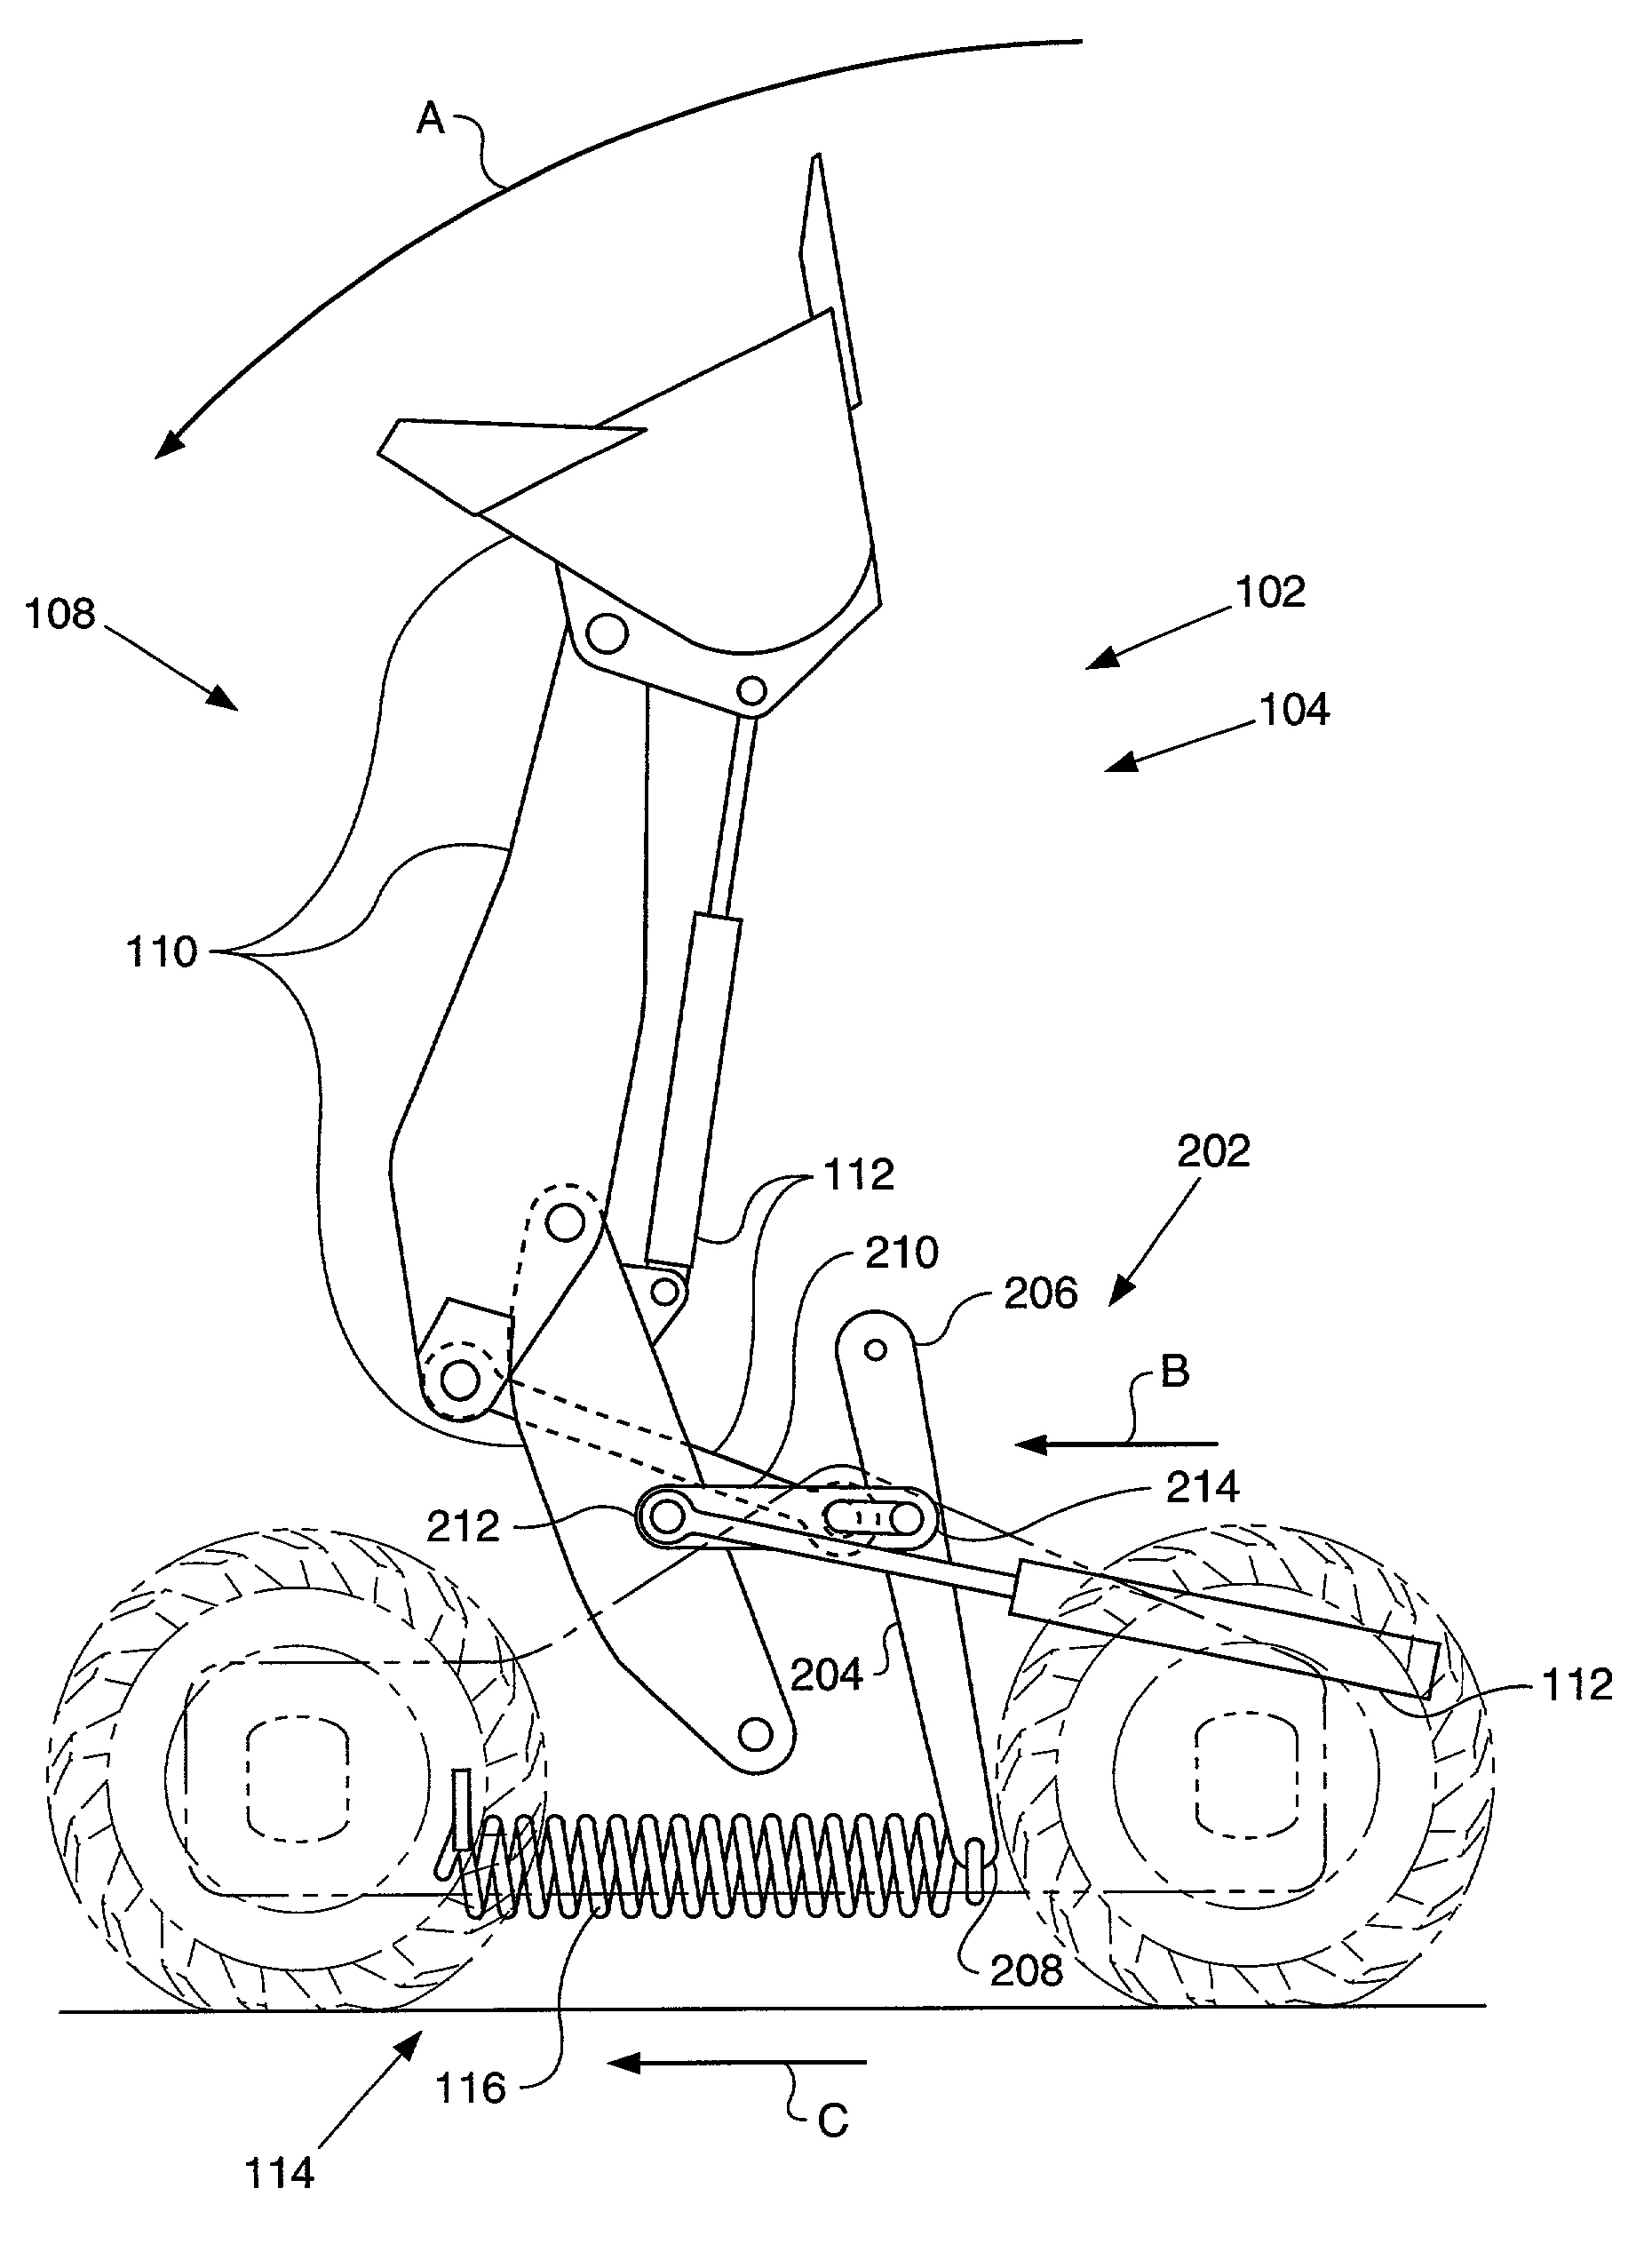 Counterbalance for linkage assembly